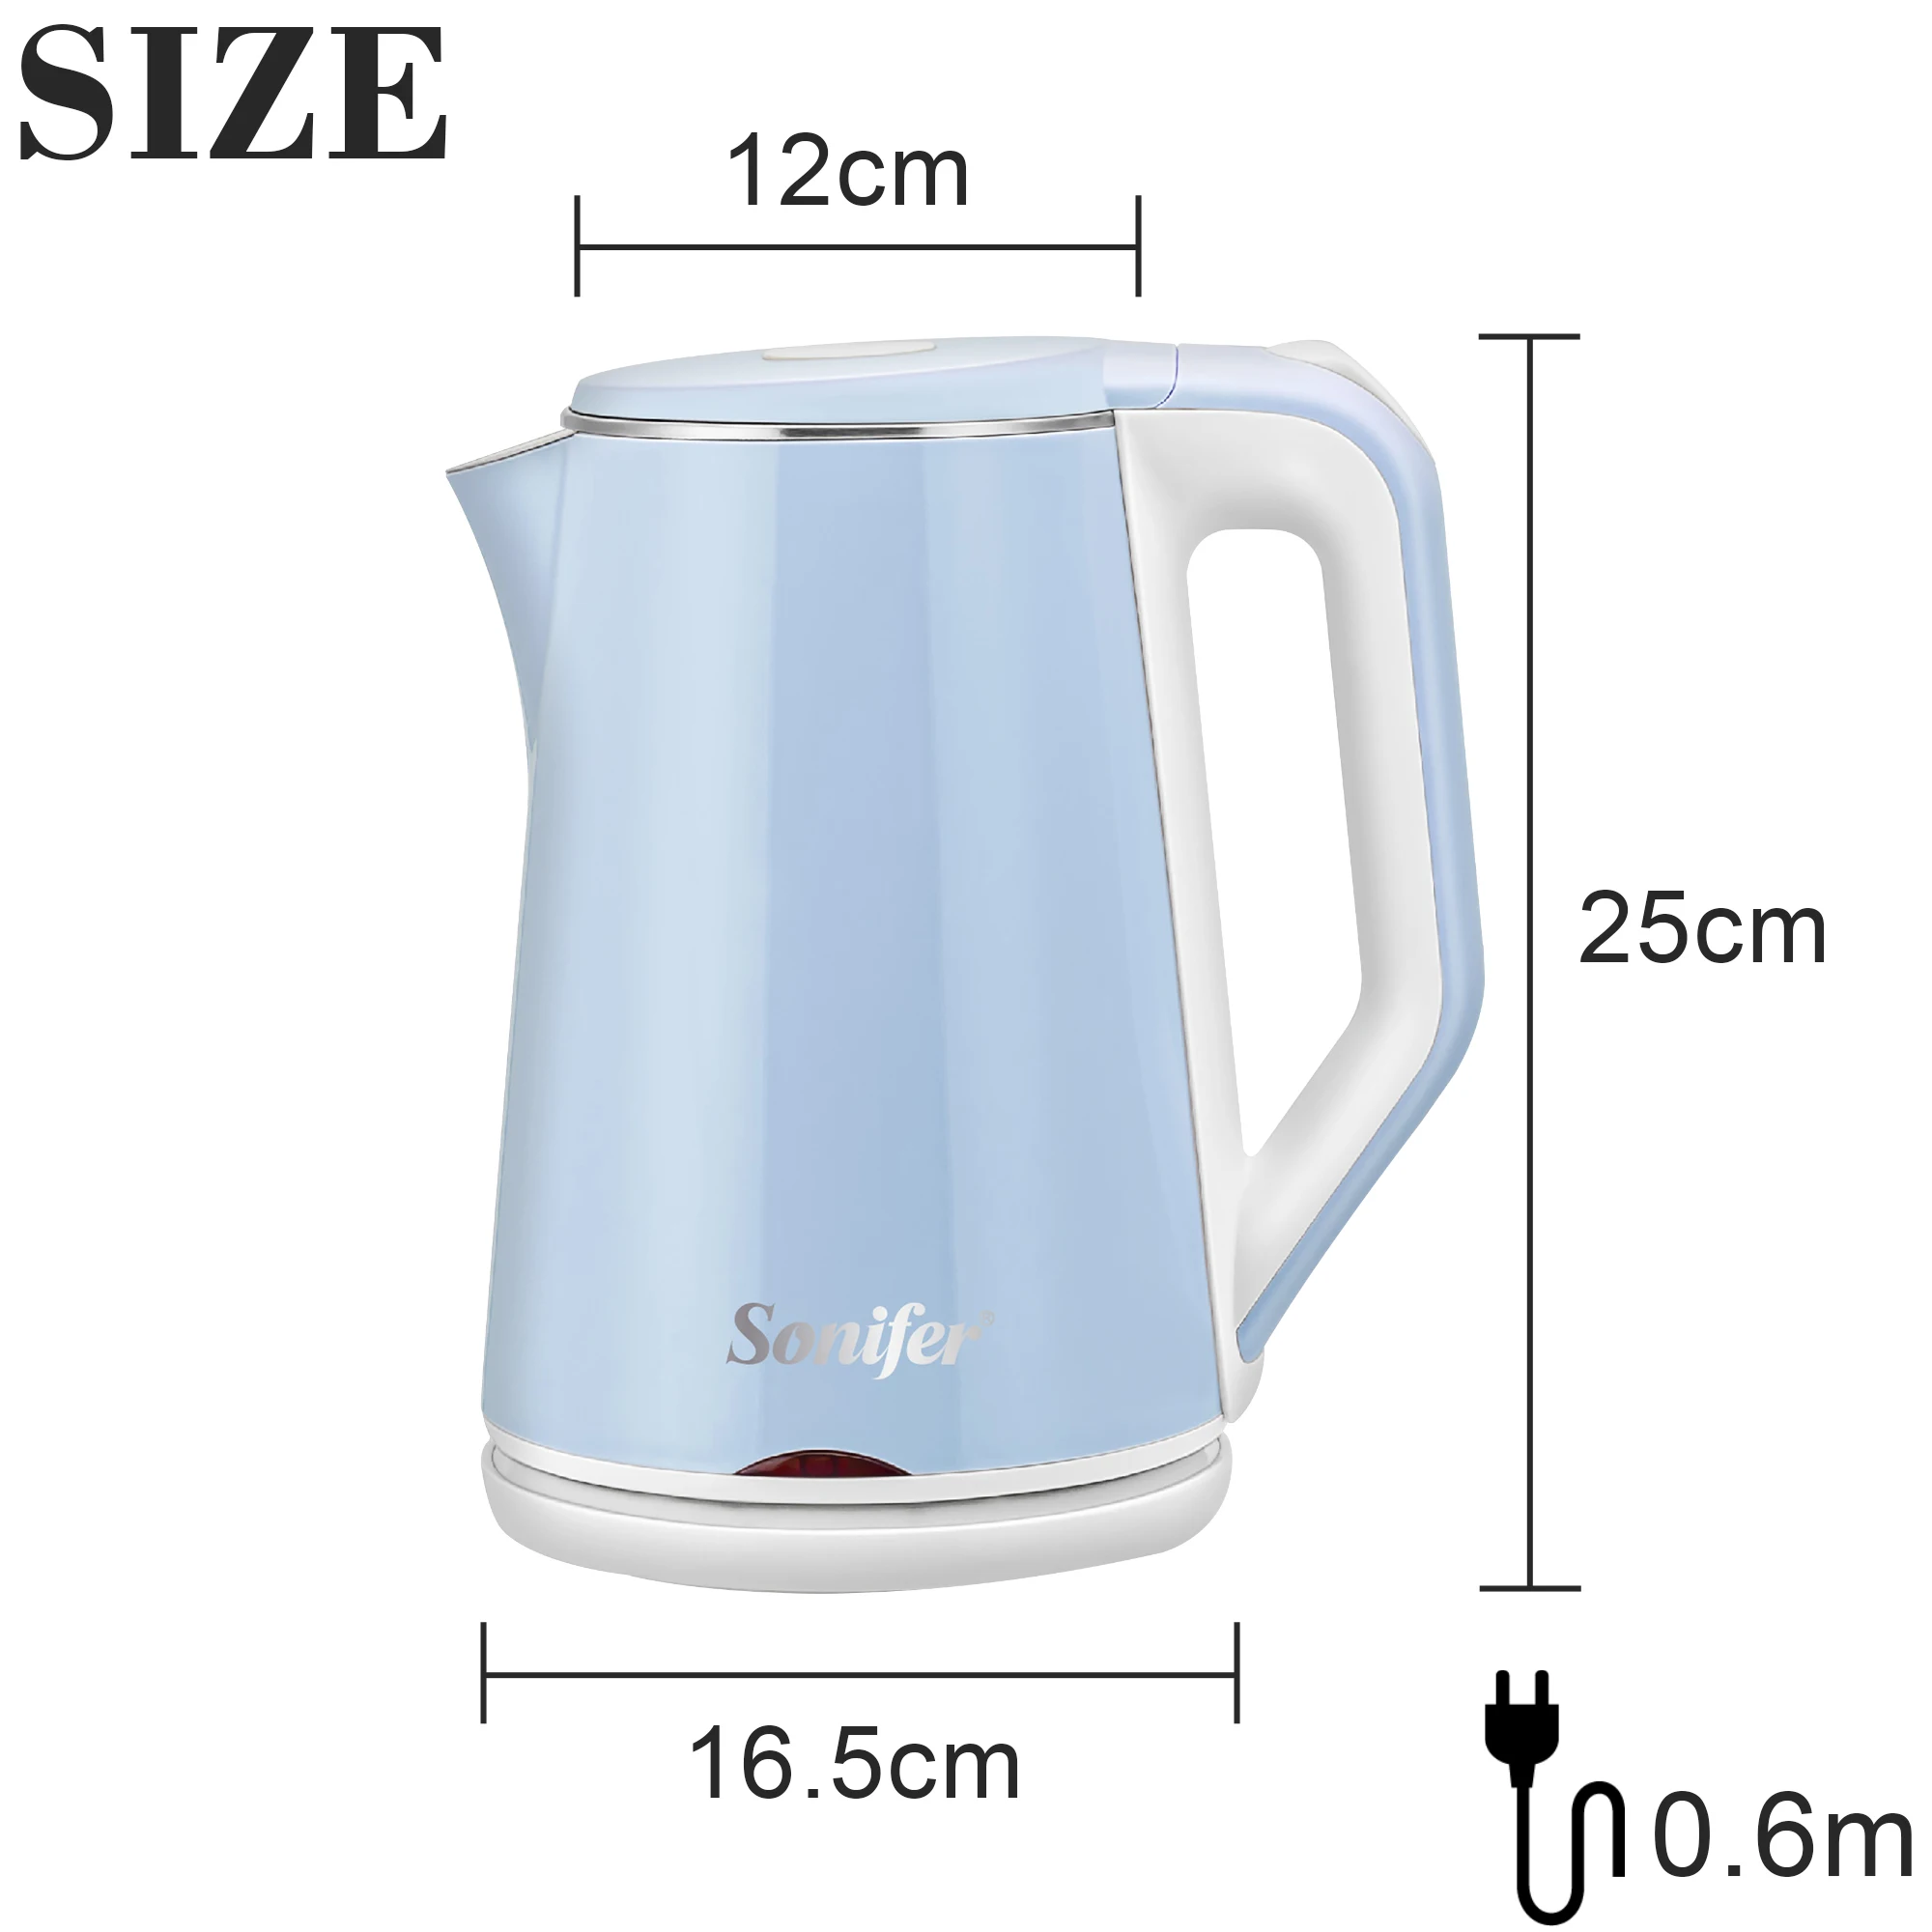 Sonifer 1.8L Electric Kettle Stainless Steel Kitchen Appliances Smart Kettle Whistle Kettle Samovar Tea Thermo Pot Gift SF2076 images - 6